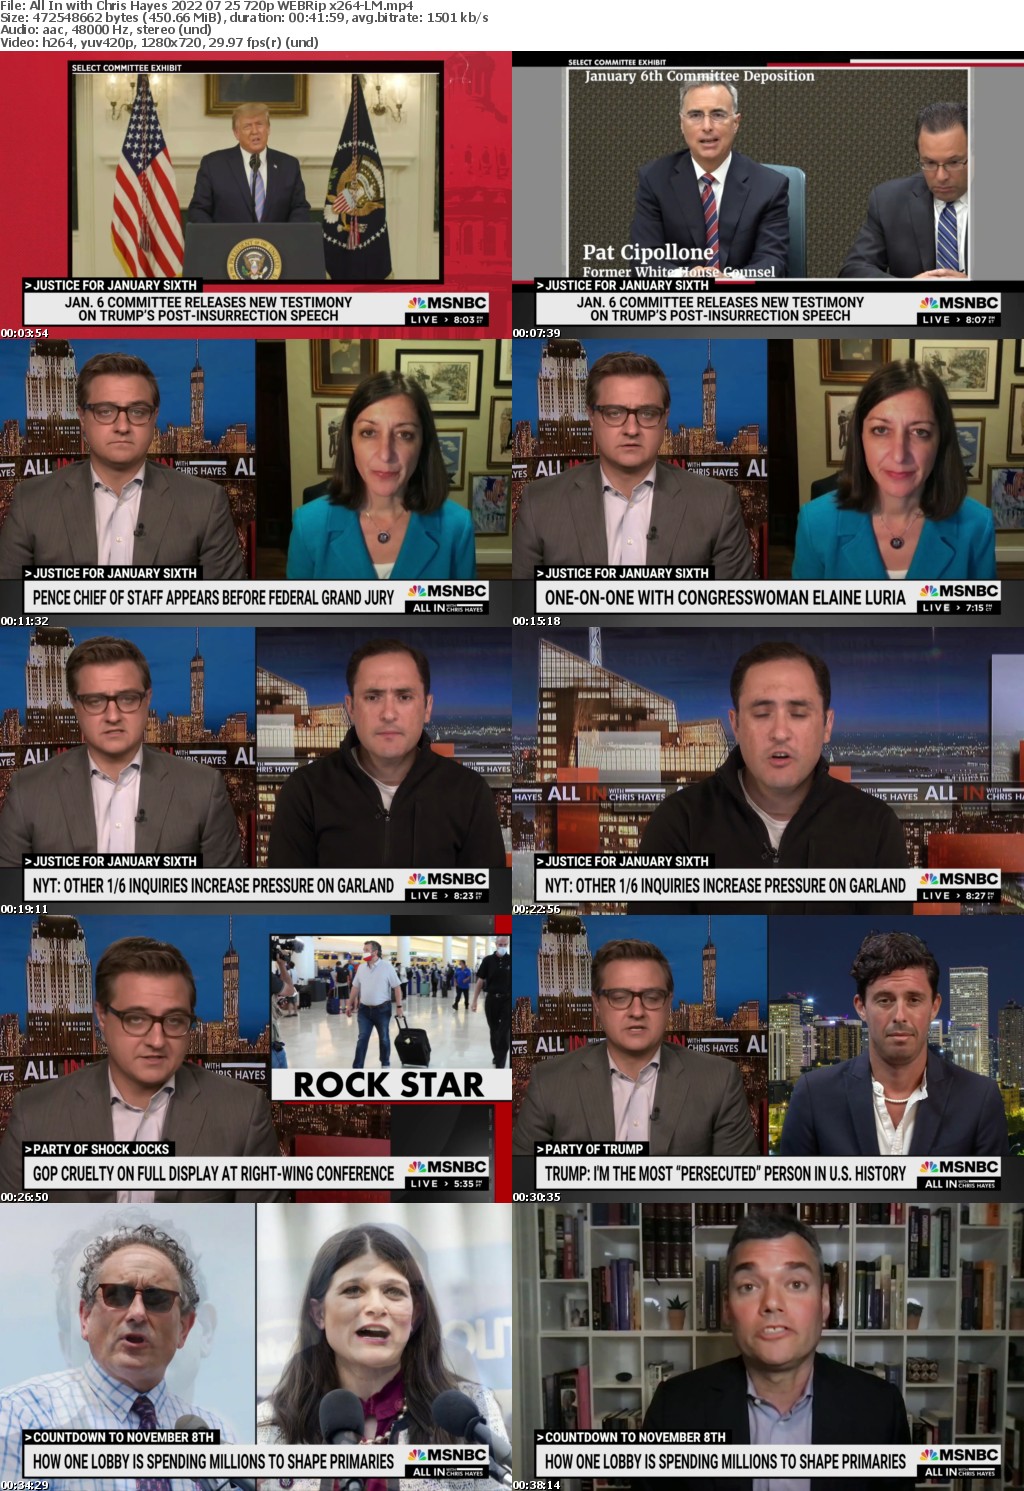 All In with Chris Hayes 2022 07 25 720p WEBRip x264-LM